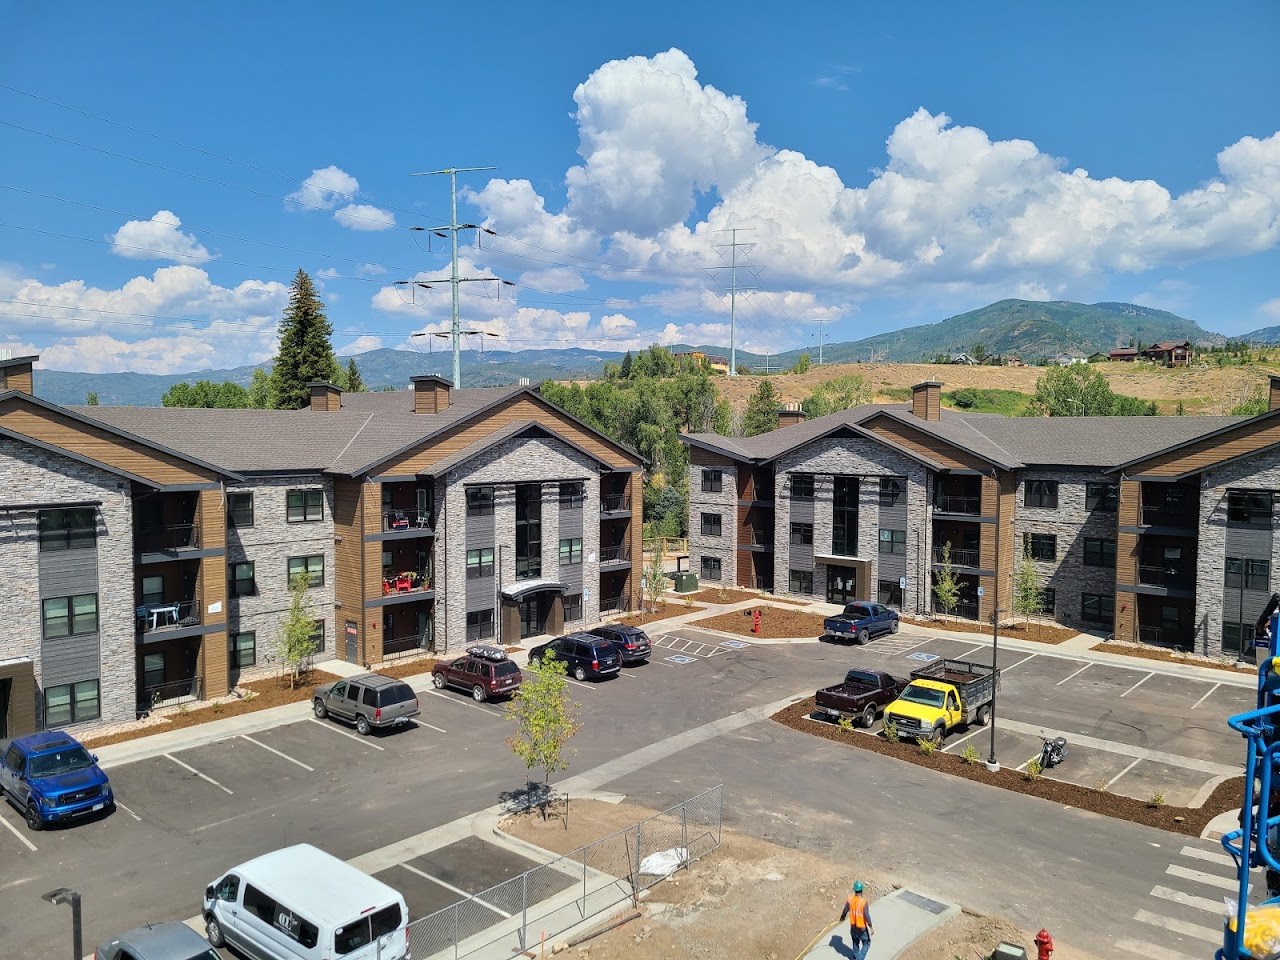 Photo of ALPENGLOW VILLAGE. Affordable housing located at 1400 PINE GROVE ROAD STEAMBOAT SPRINGS, CO 80487